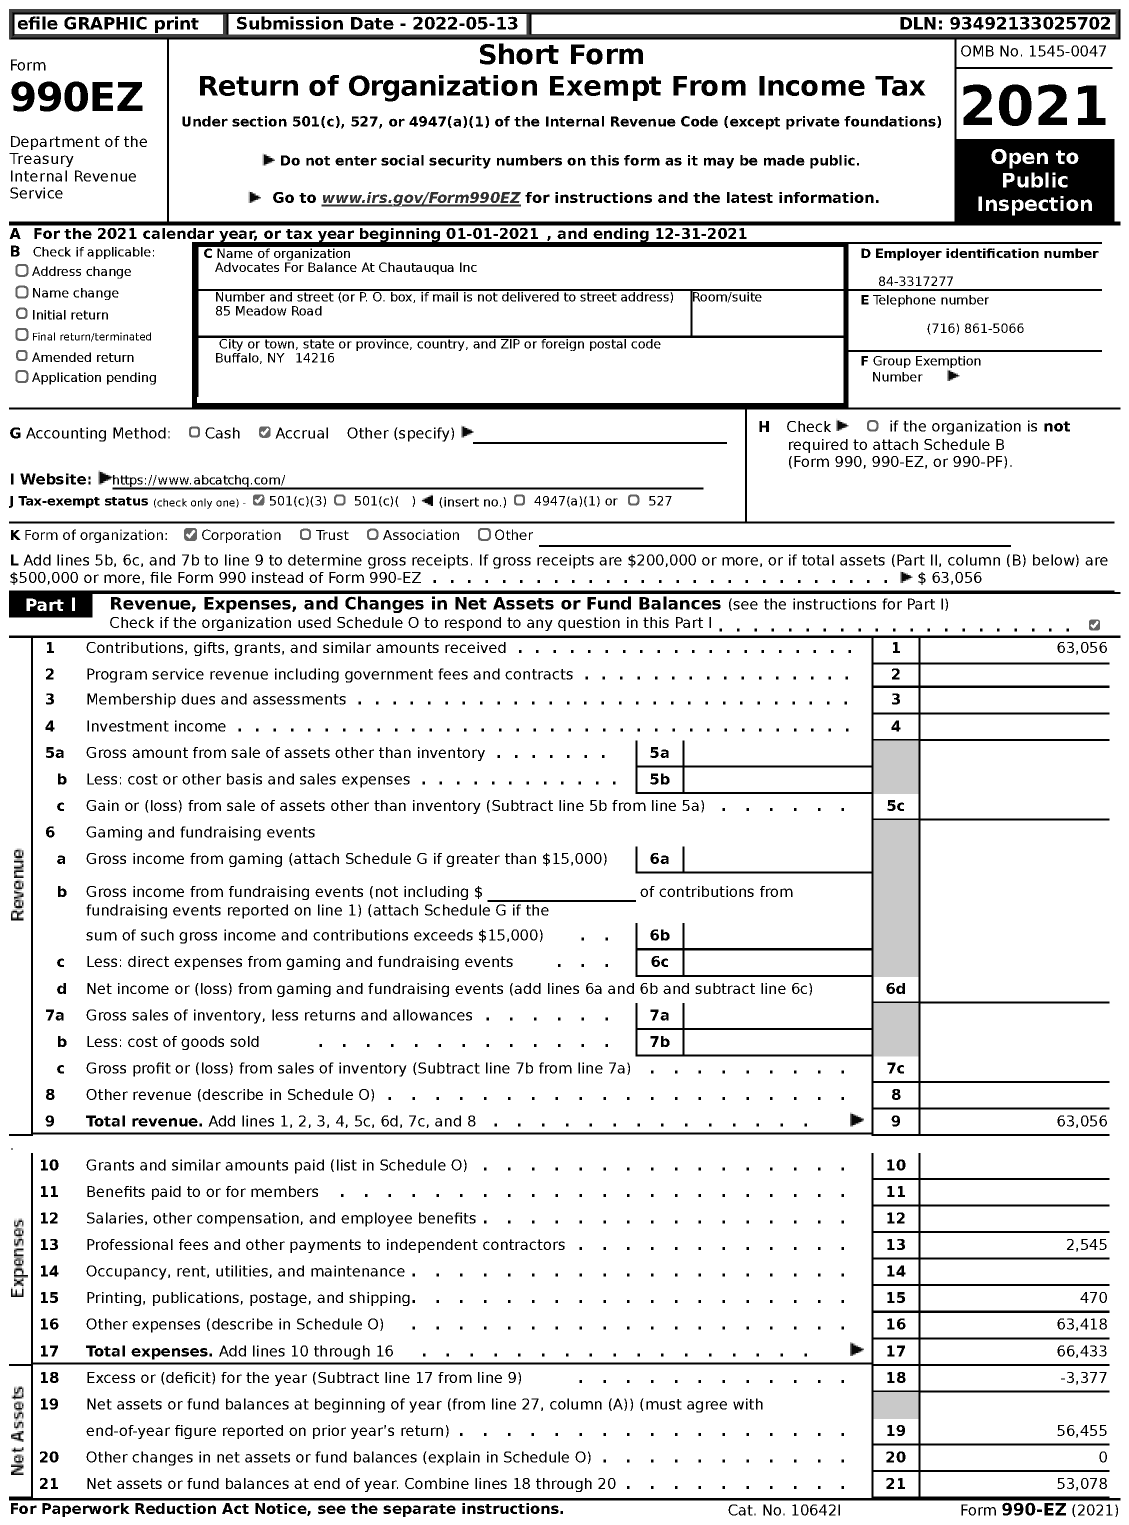 Image of first page of 2021 Form 990EZ for Advocates For Balance At Chautauqua